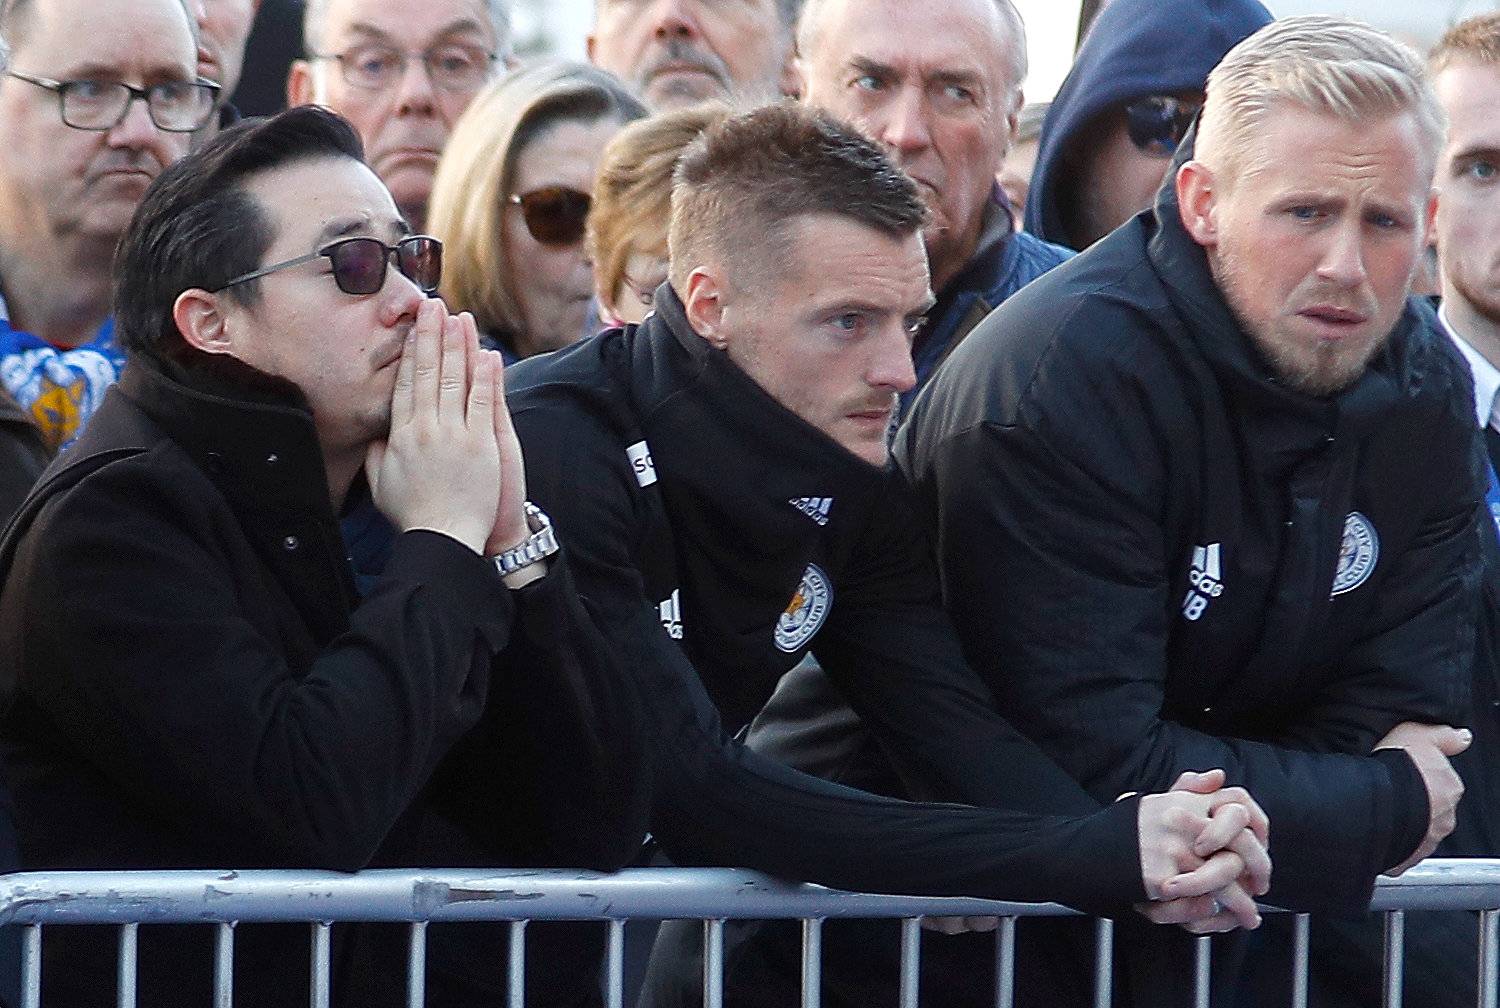 Son of Leicester City's owner Thai businessman Vichai Srivaddhanaprabha, and players look at tributes left for Vichai and four other people who died when the helicopter they were travelling in crashed in Leicester